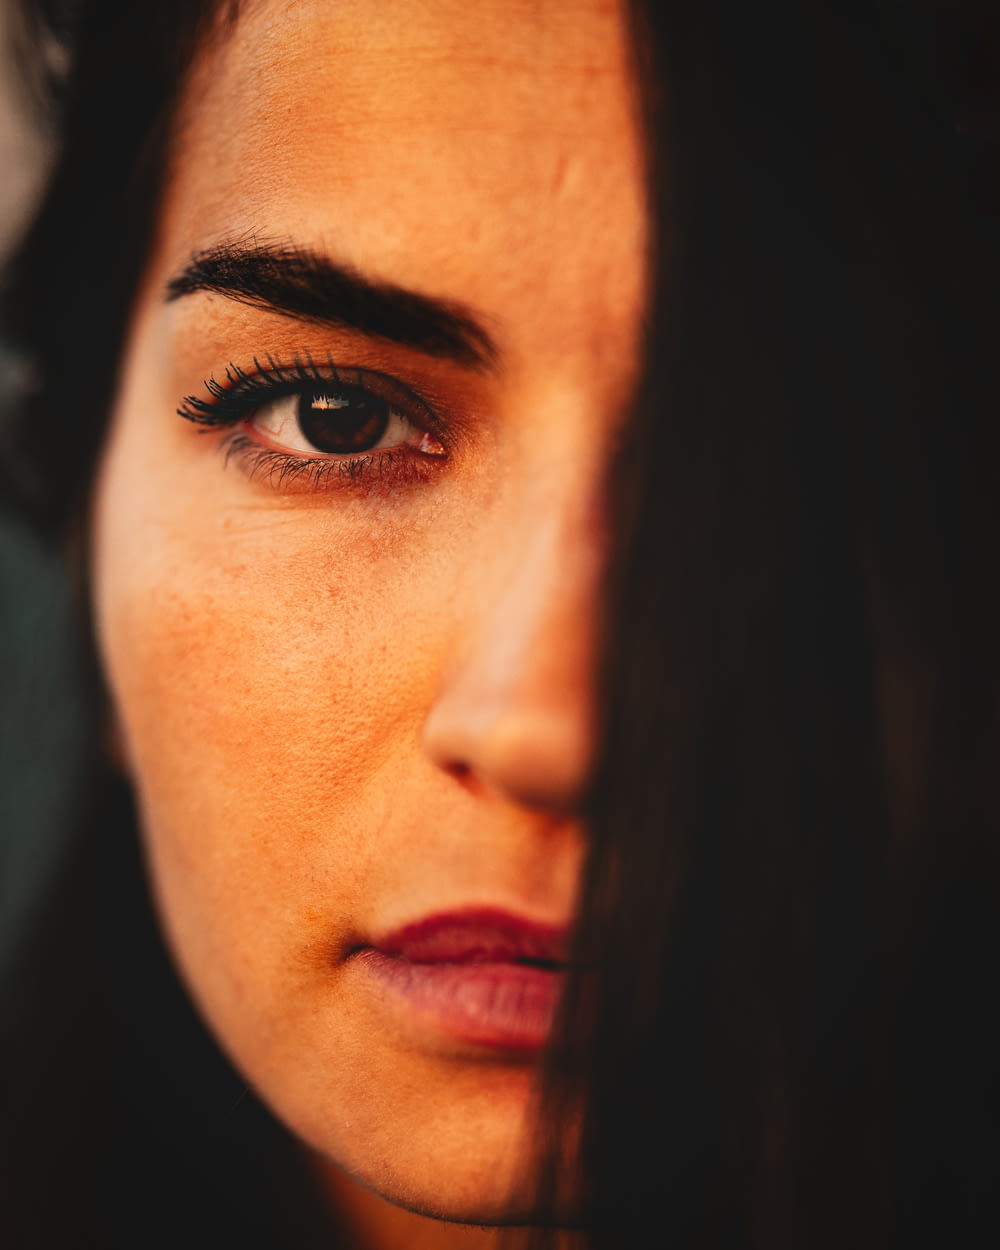 a close up of a woman's face with dark hair